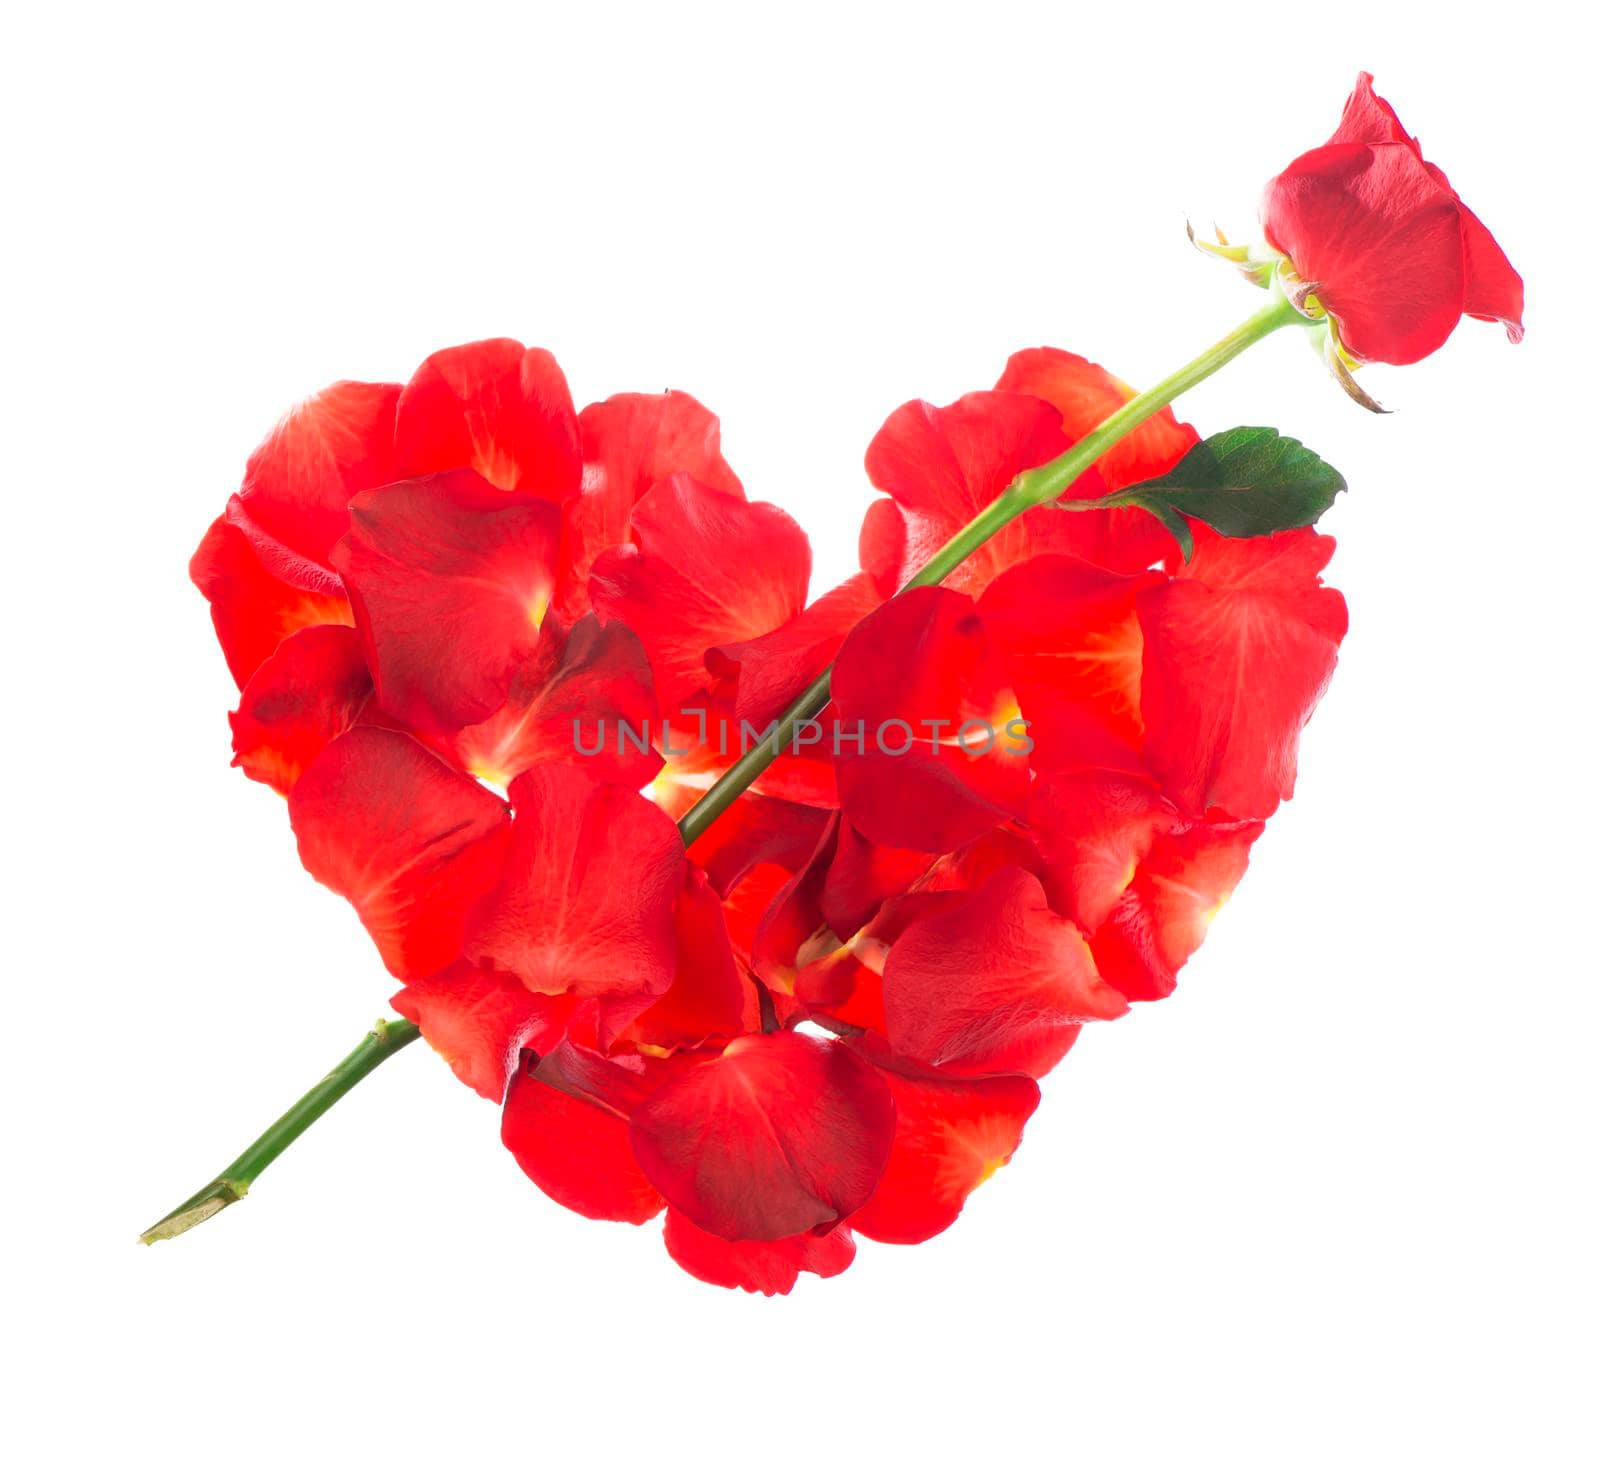 Red rose petals  isolated over the white background